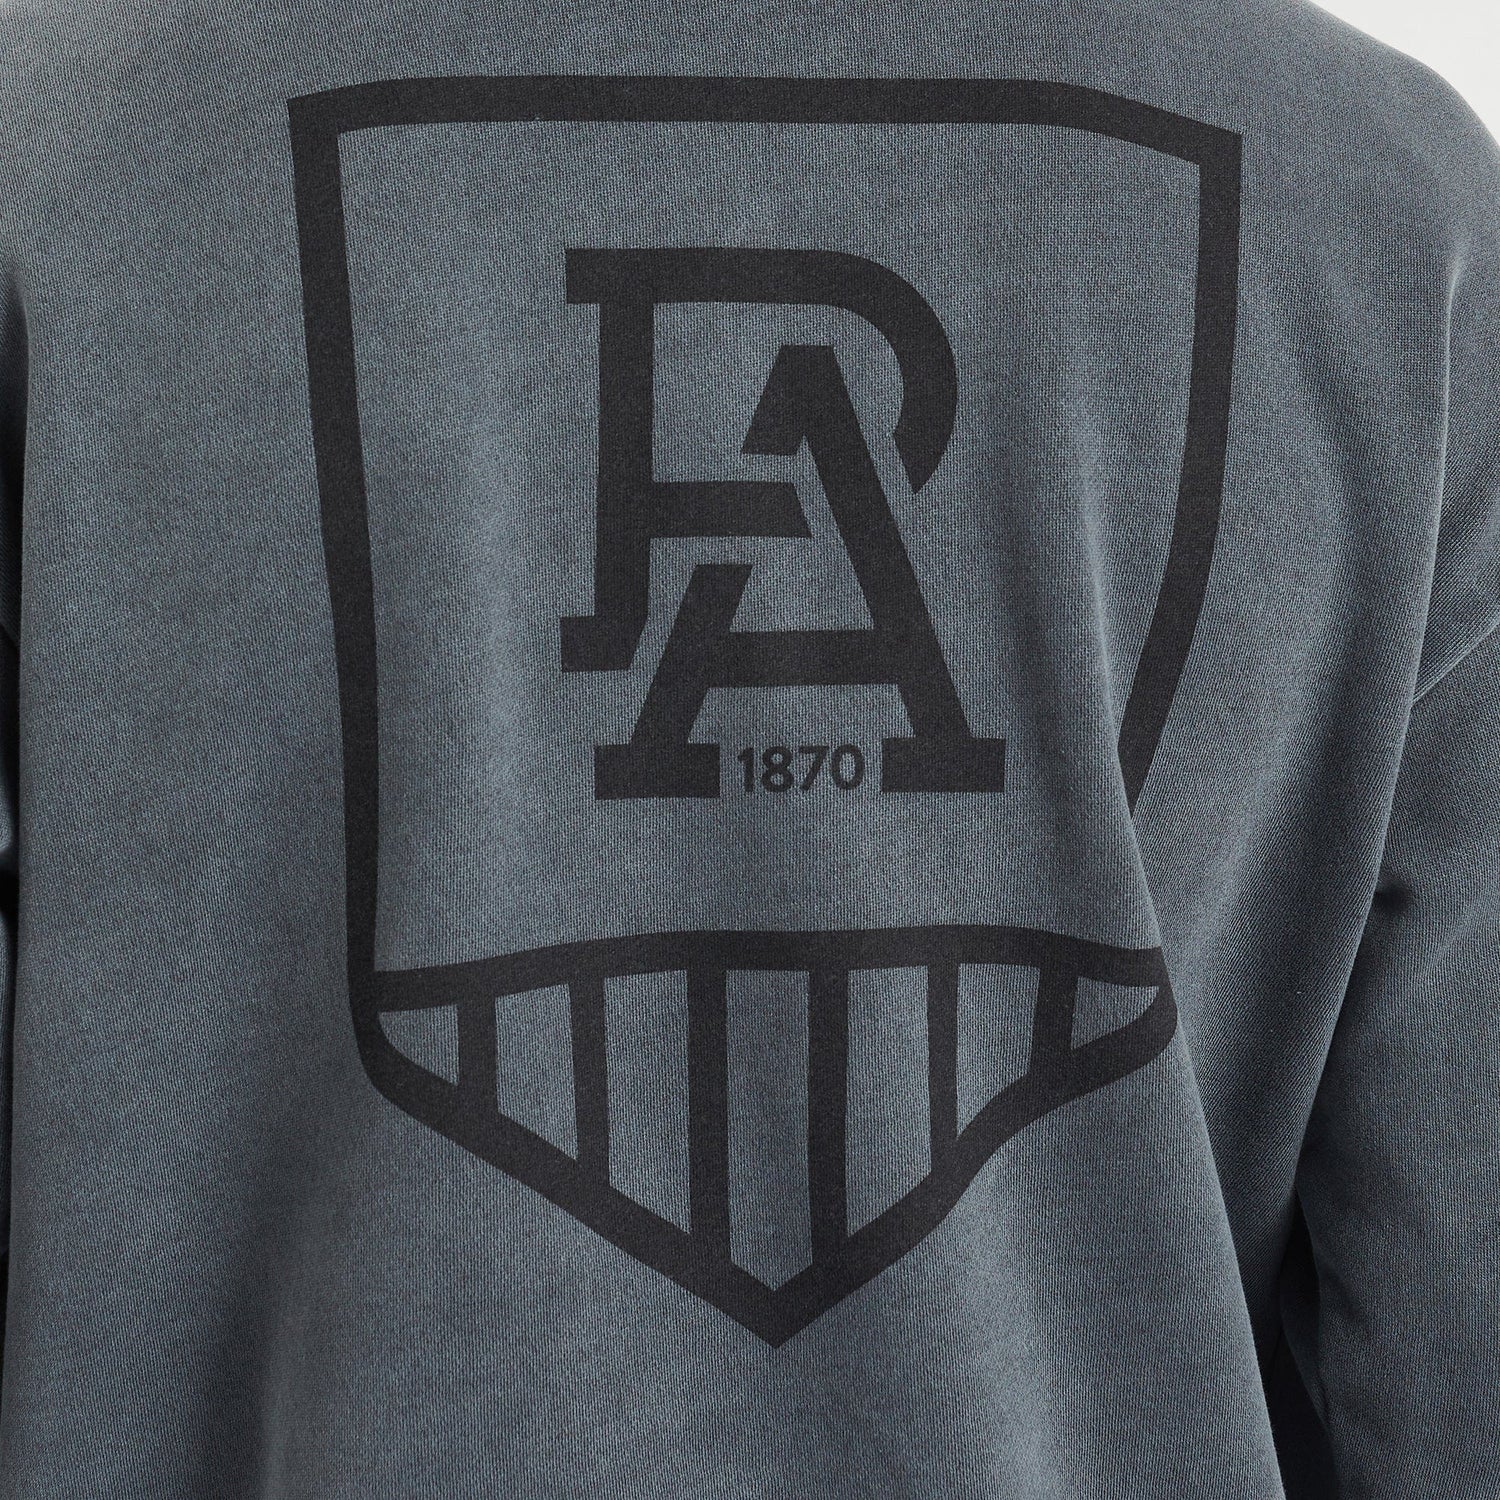 Port Adelaide Relaxed Hoodie Pigment Charcoal